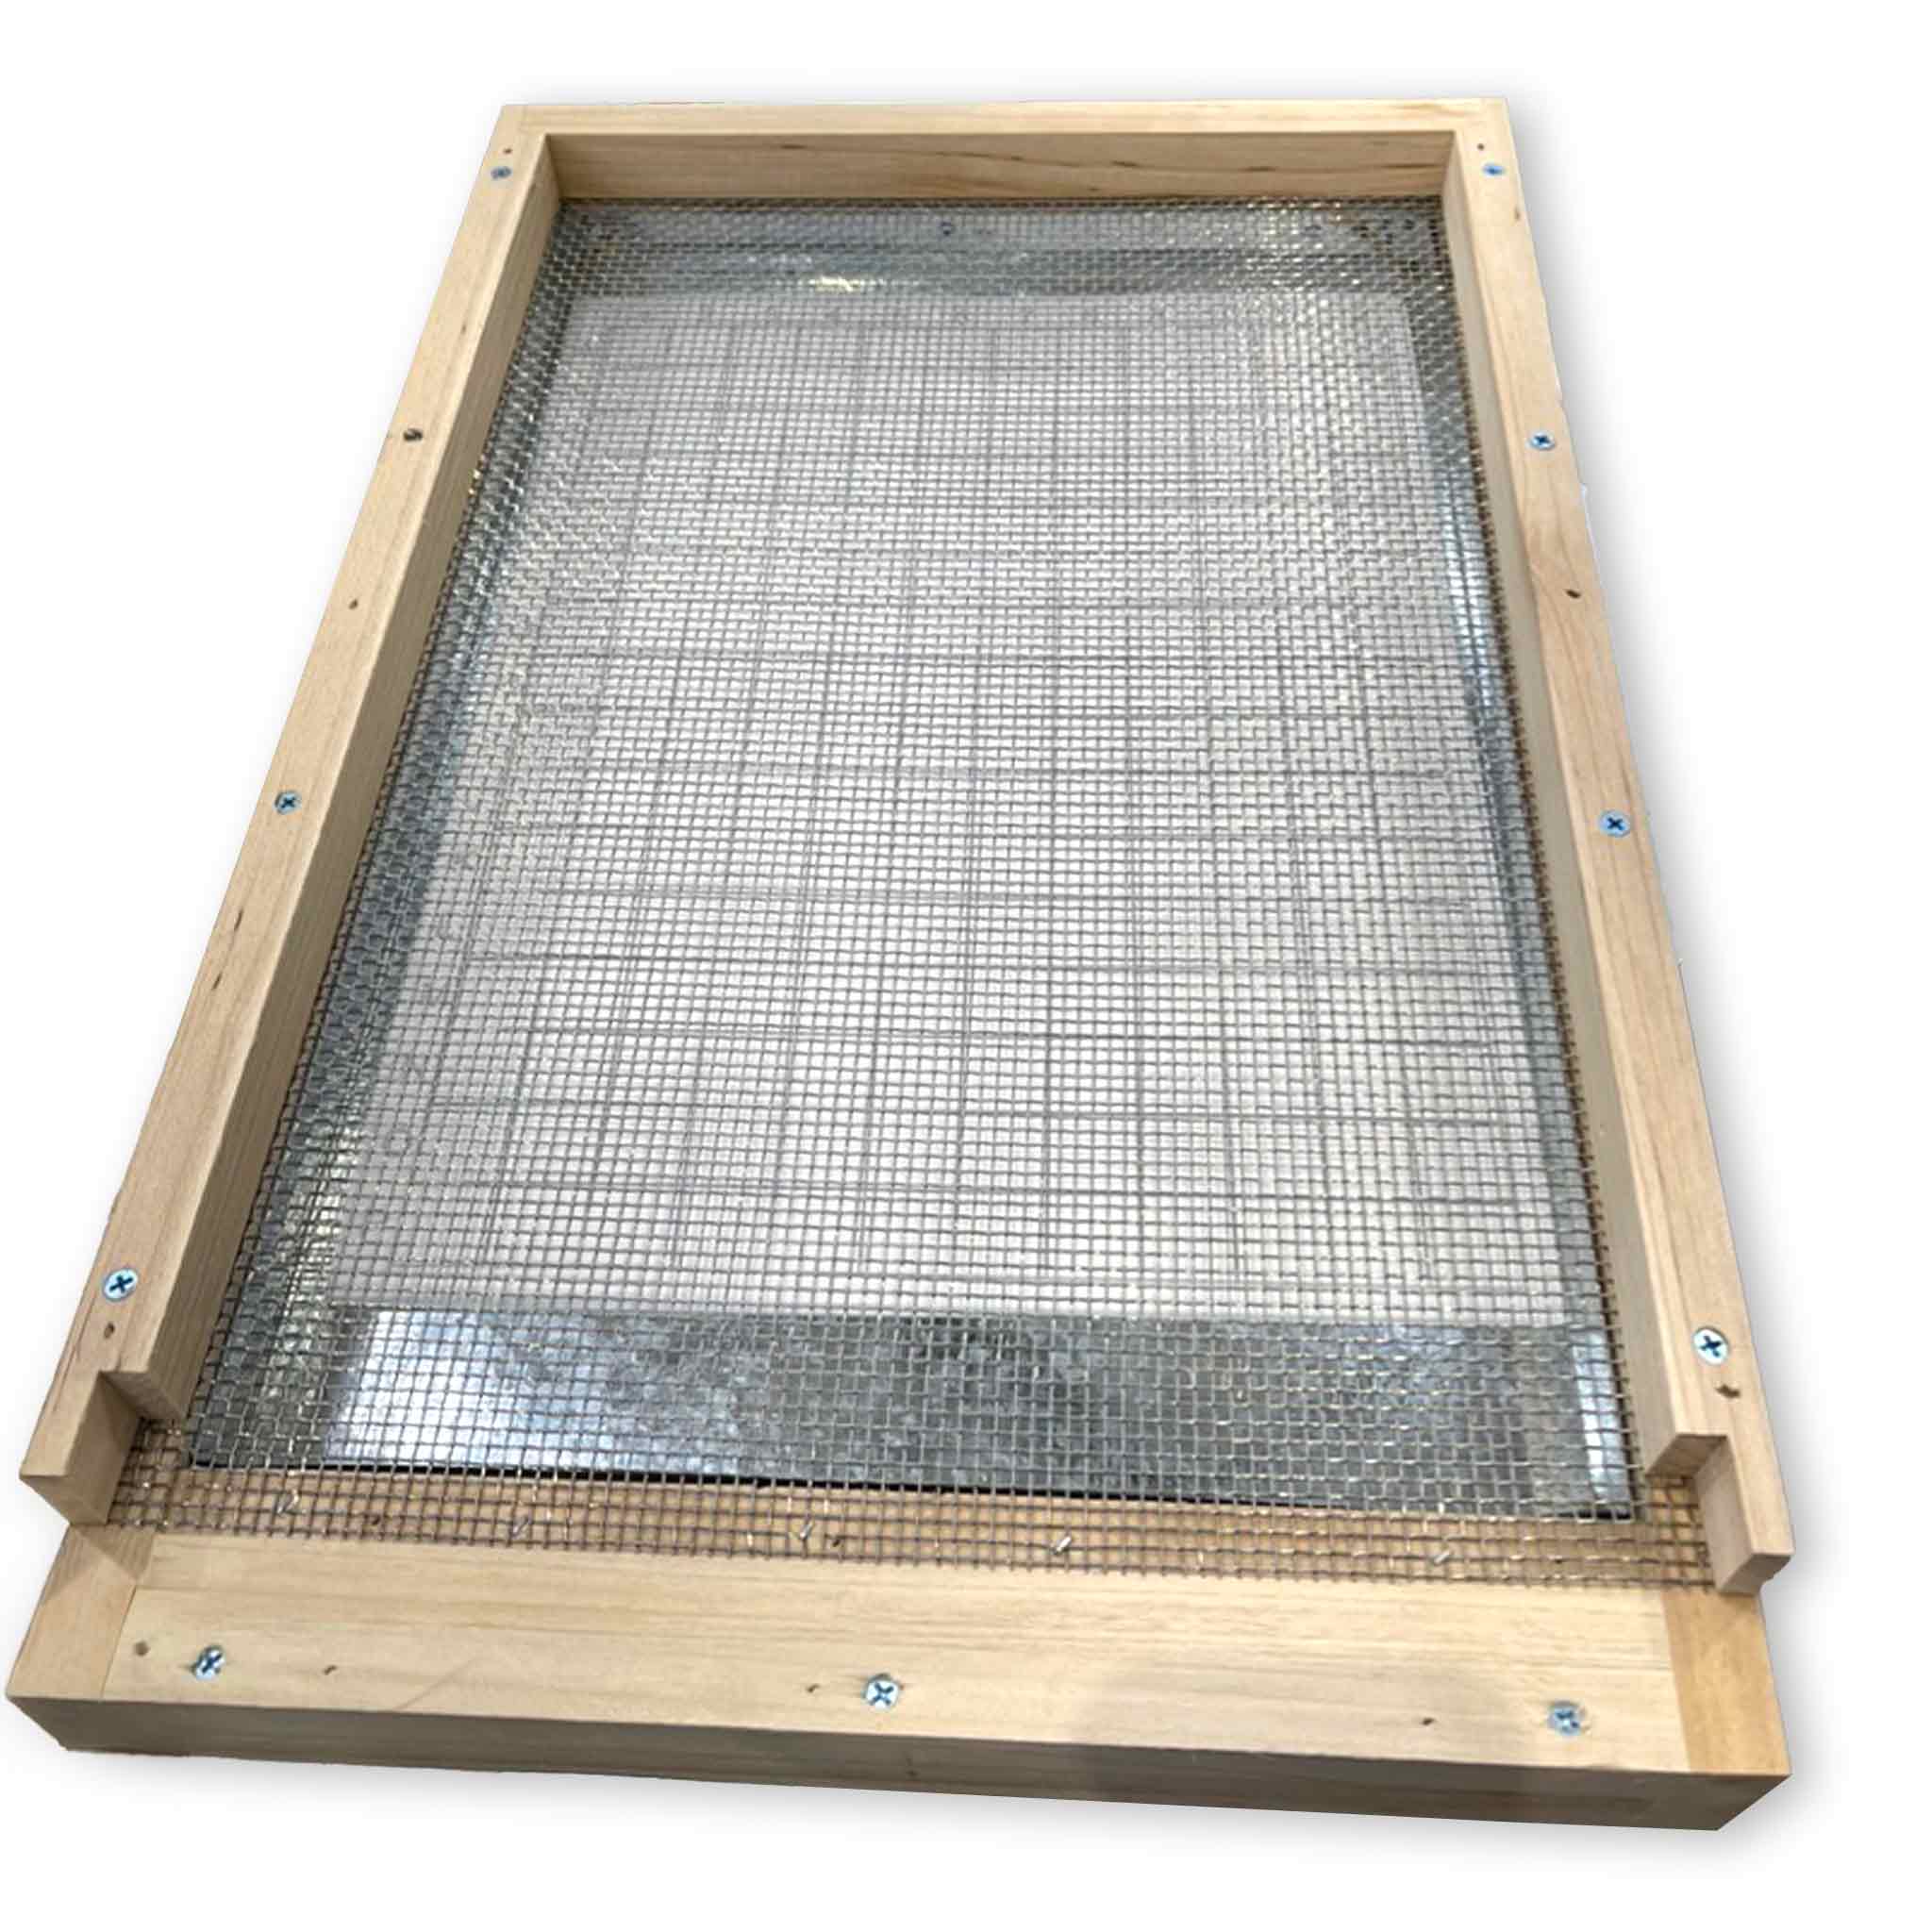 Varroa Mite Sticky Mat Board used with Ventilated Screened Bottom Board Floors (Pack 4) - Health collection by Buzzbee Beekeeping Supplies